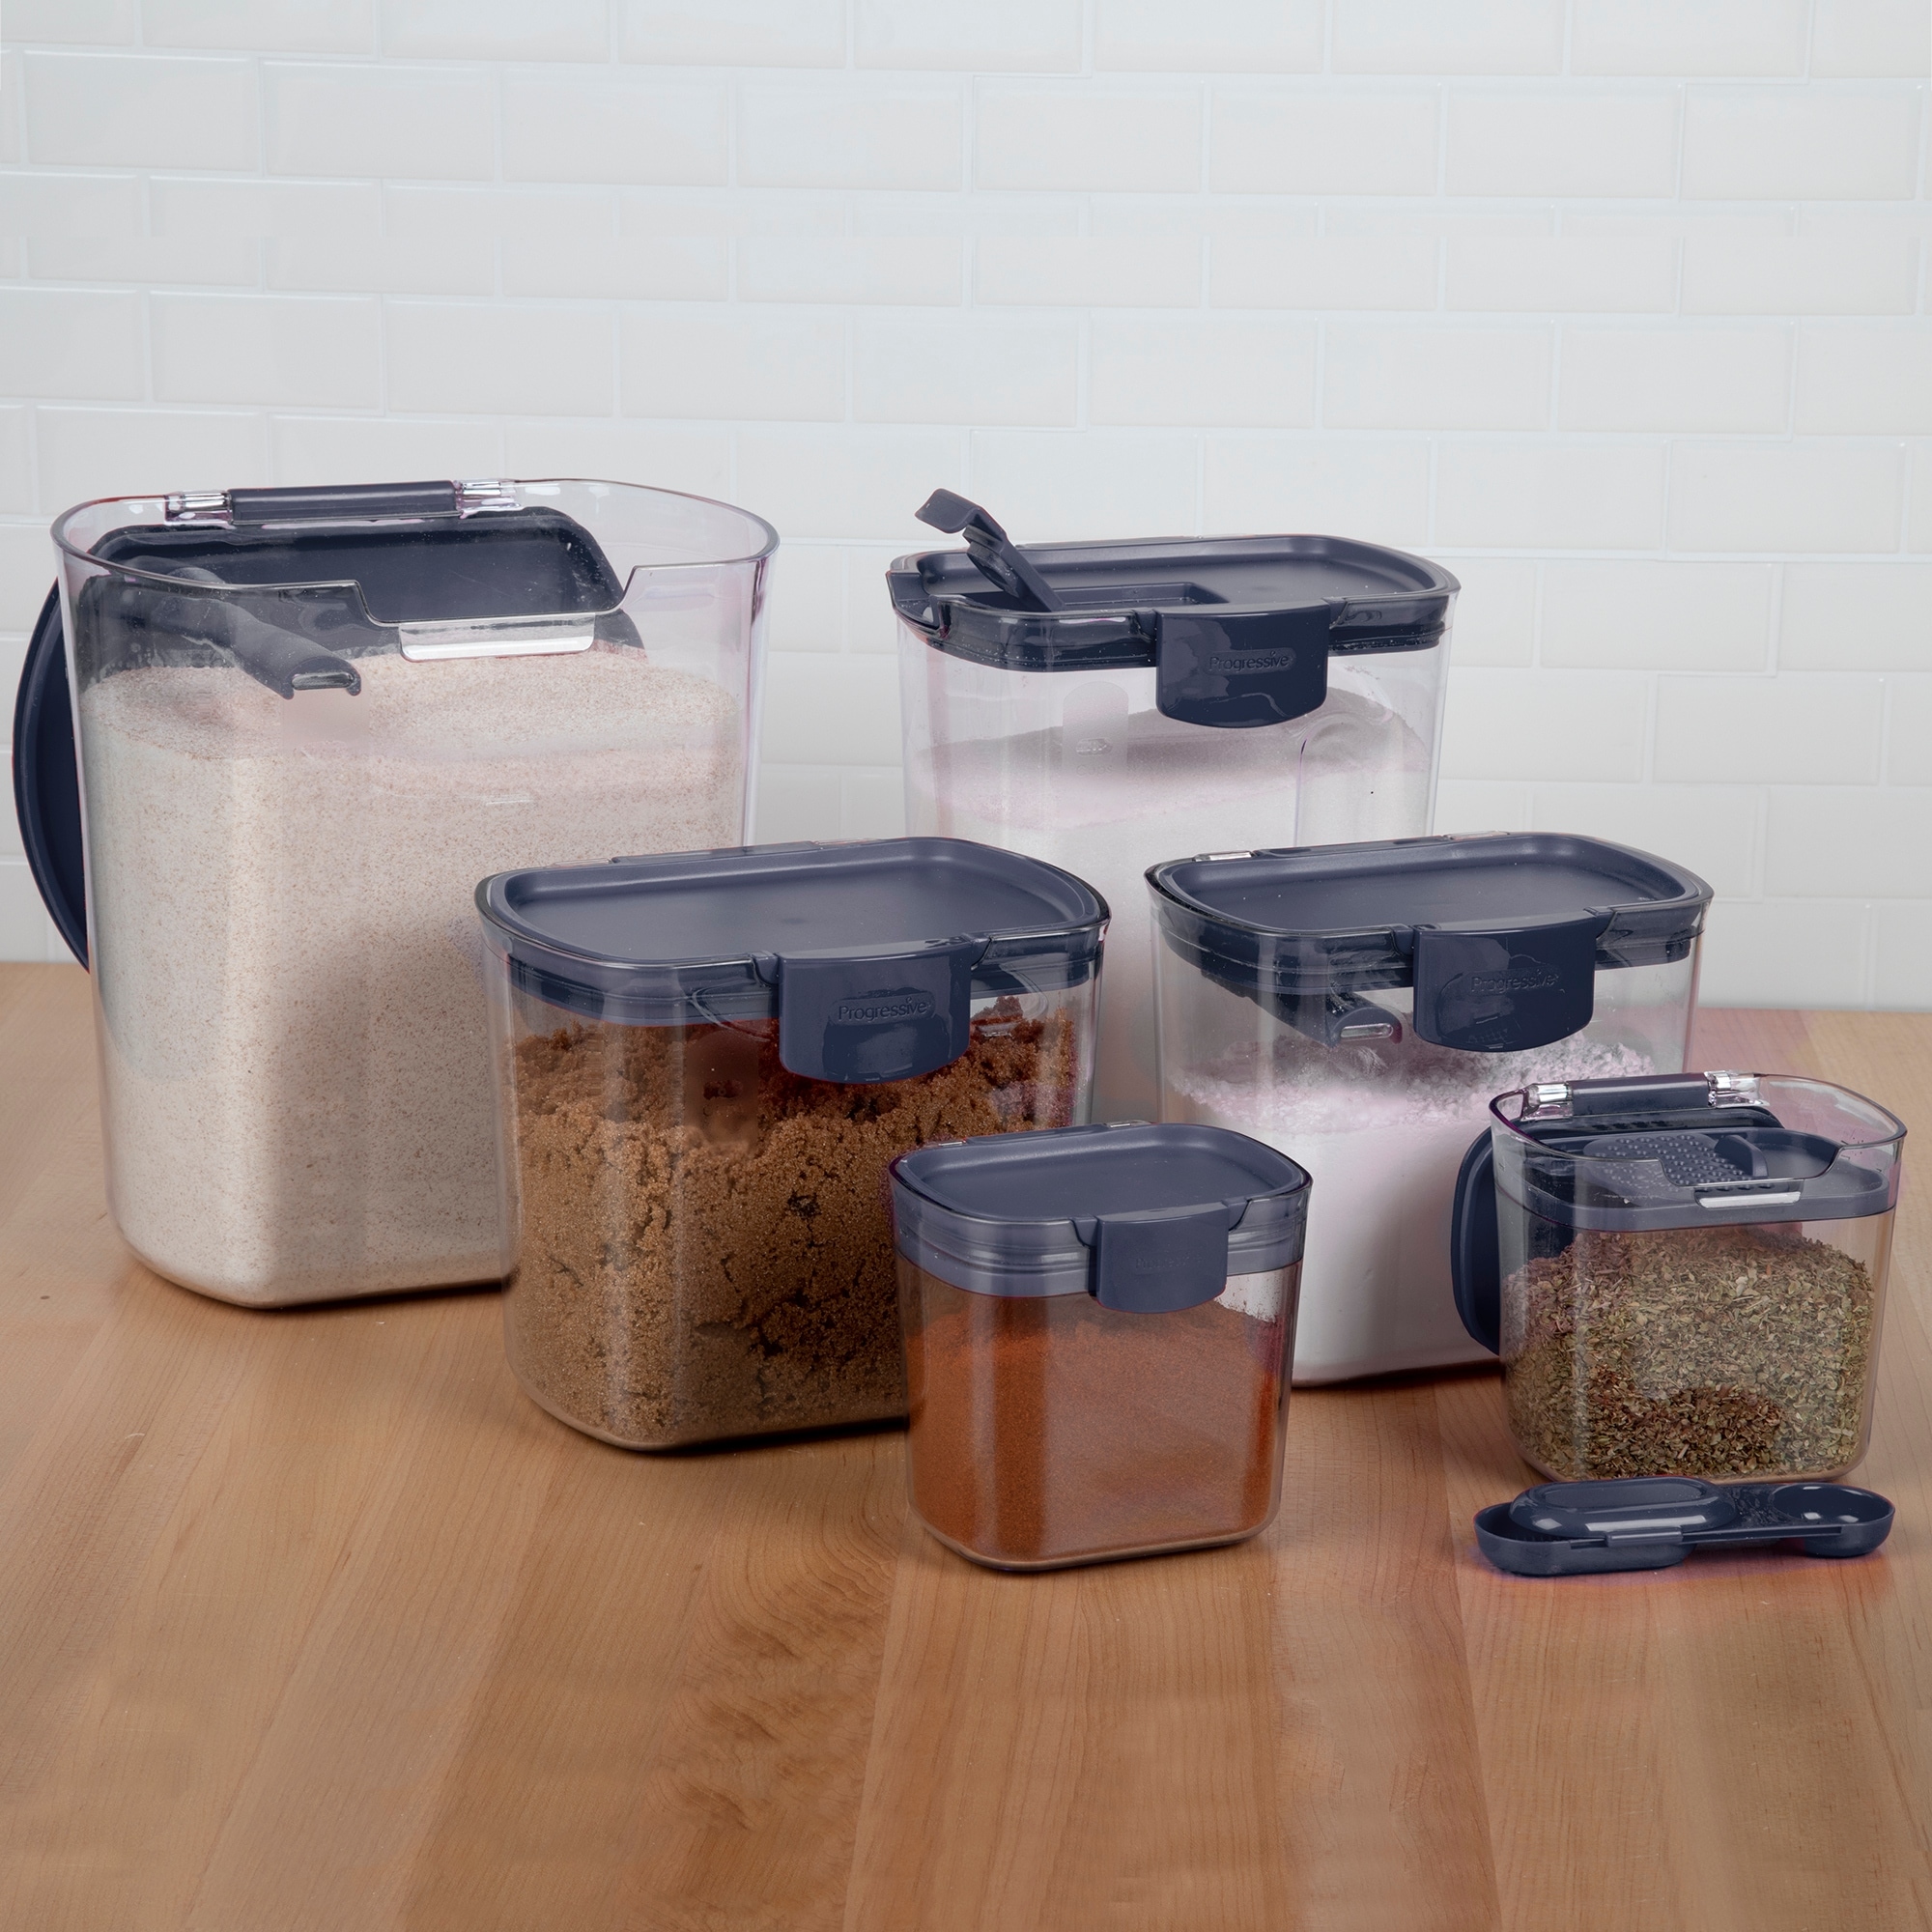 https://ak1.ostkcdn.com/images/products/is/images/direct/686d1338897f851d931bd60fe56673fc6aa53ae7/Progressive-International-Prepworks-ProKeeper-12-Piece-Container-Set.jpg